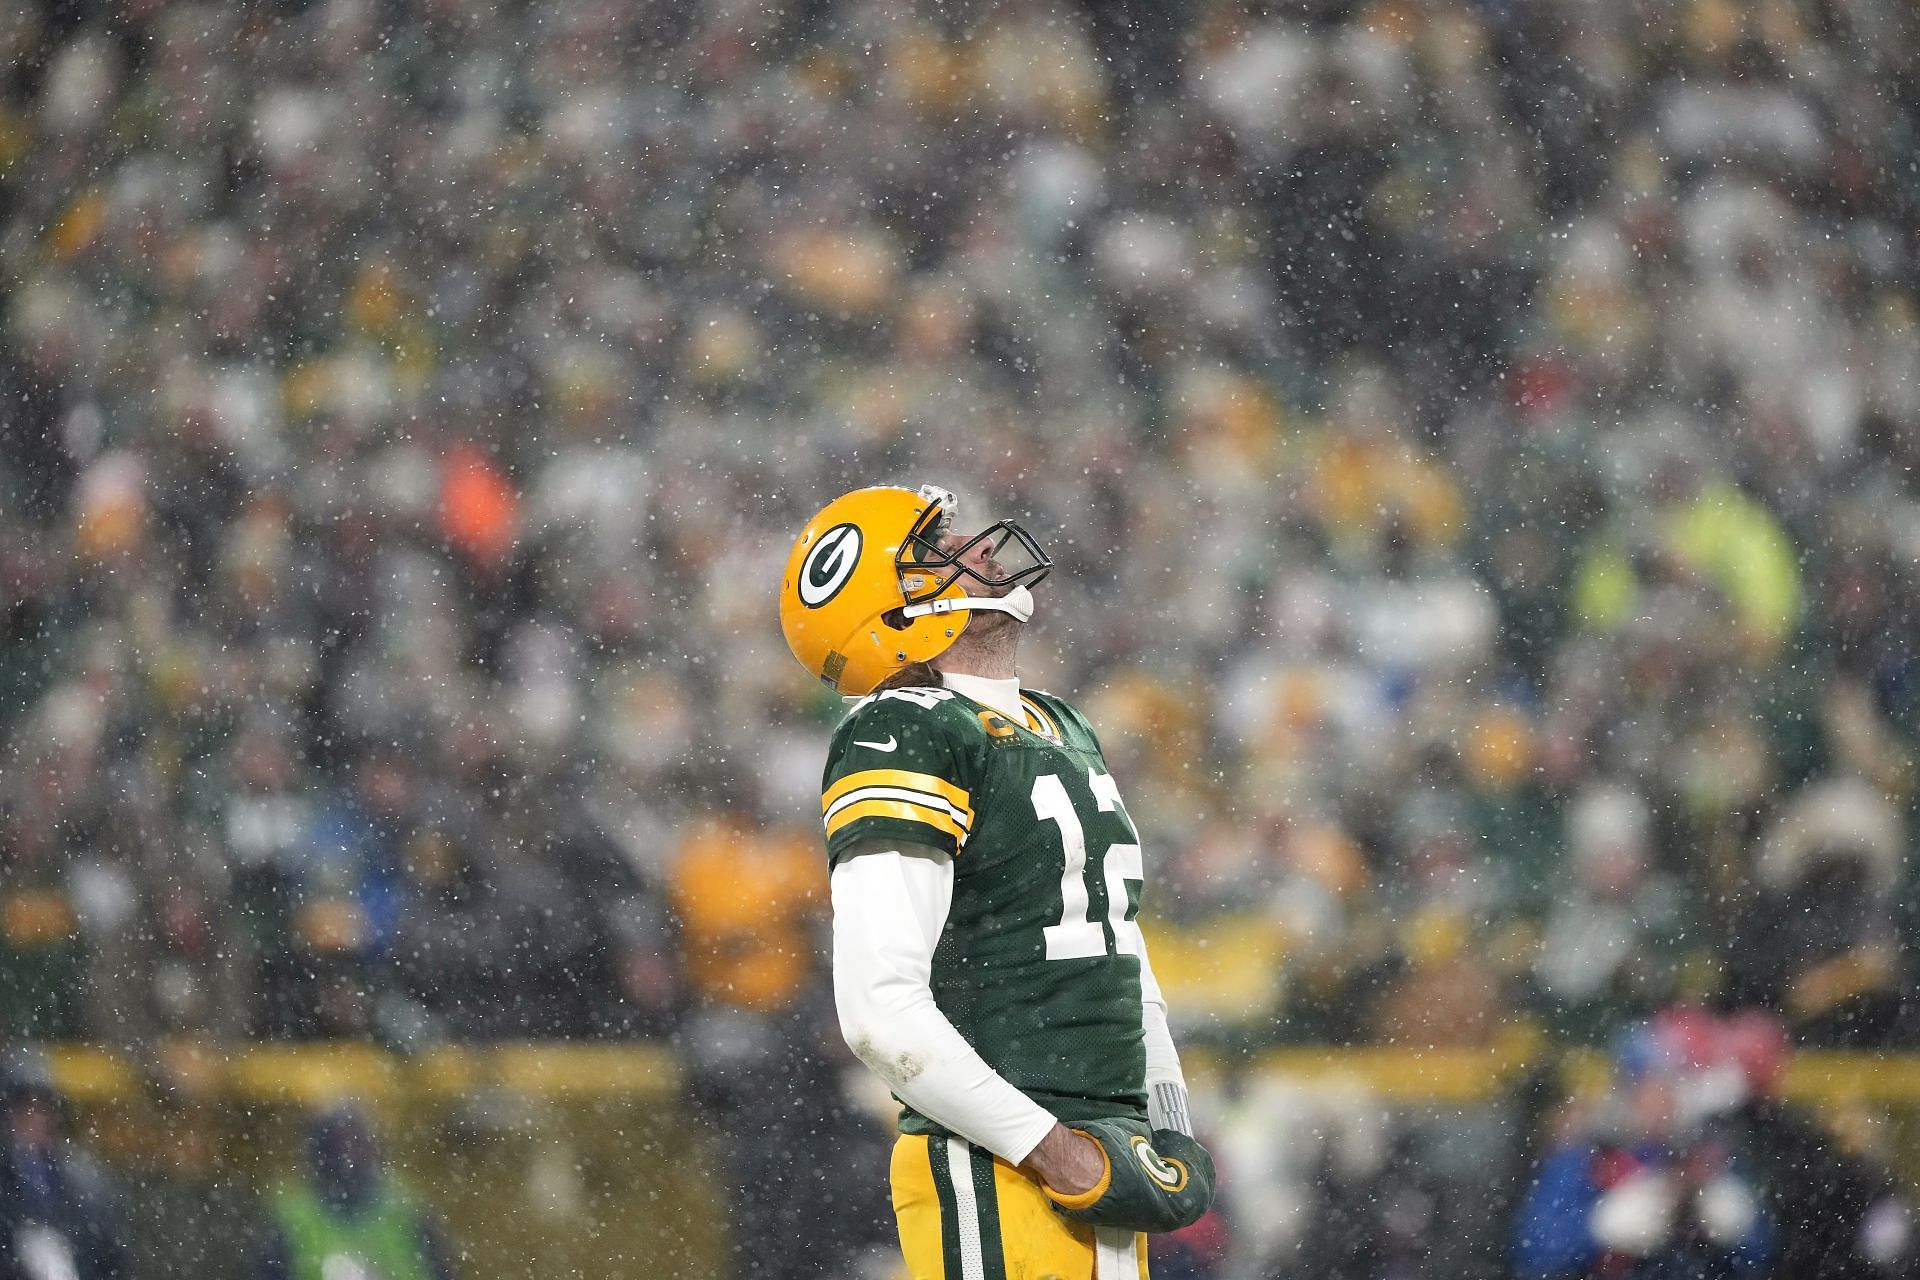 More than anything else, Aaron Rodgers looks skinny in his new uniform -  NBC Sports